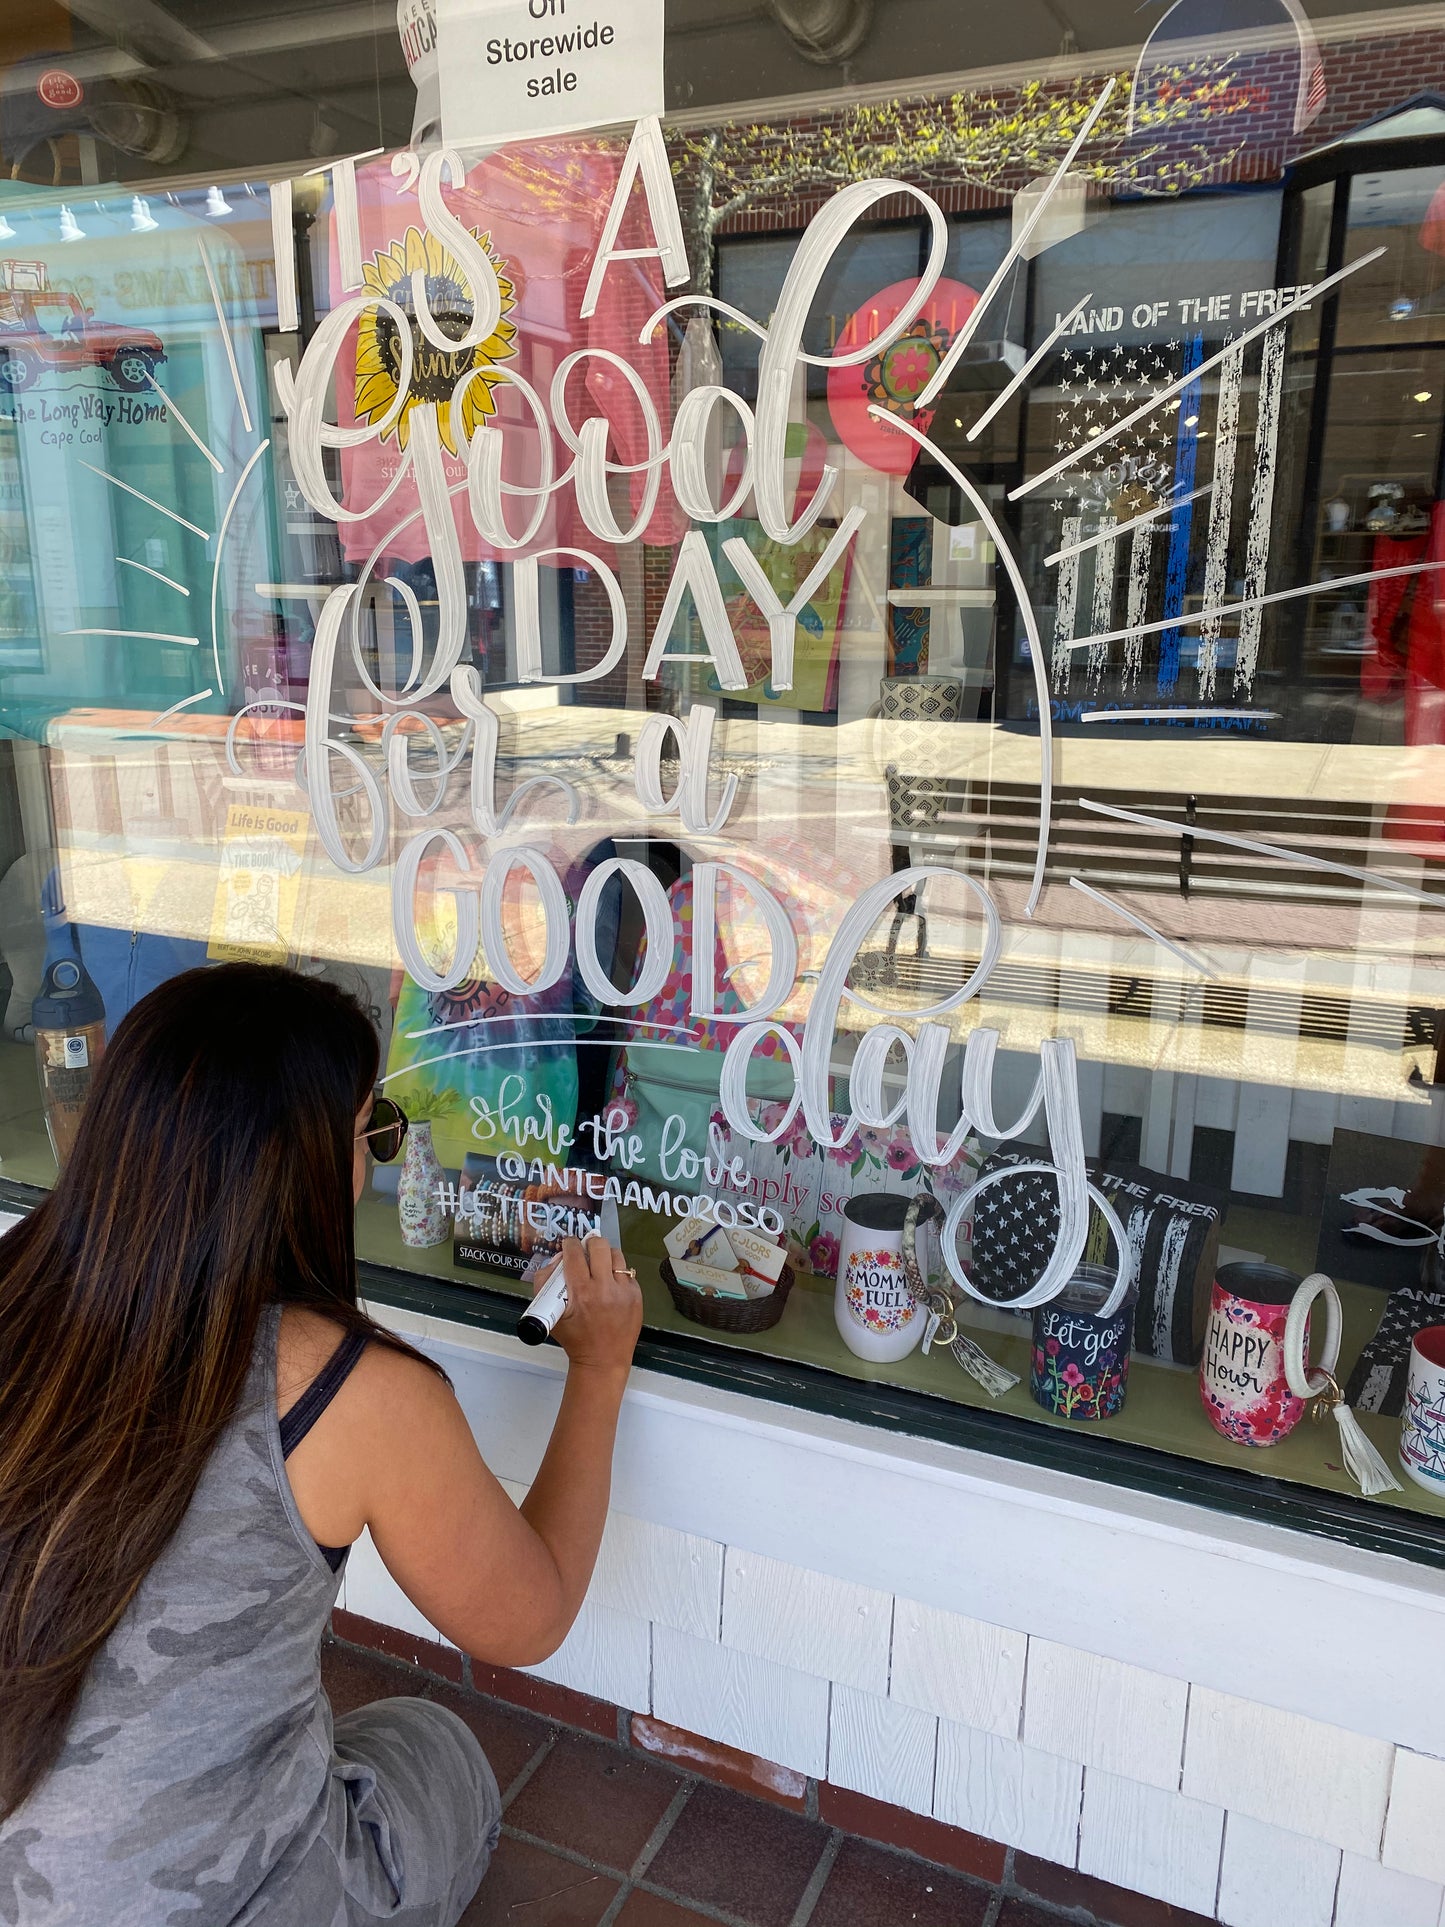 Load image into Gallery viewer, Custom Window Lettering Design
